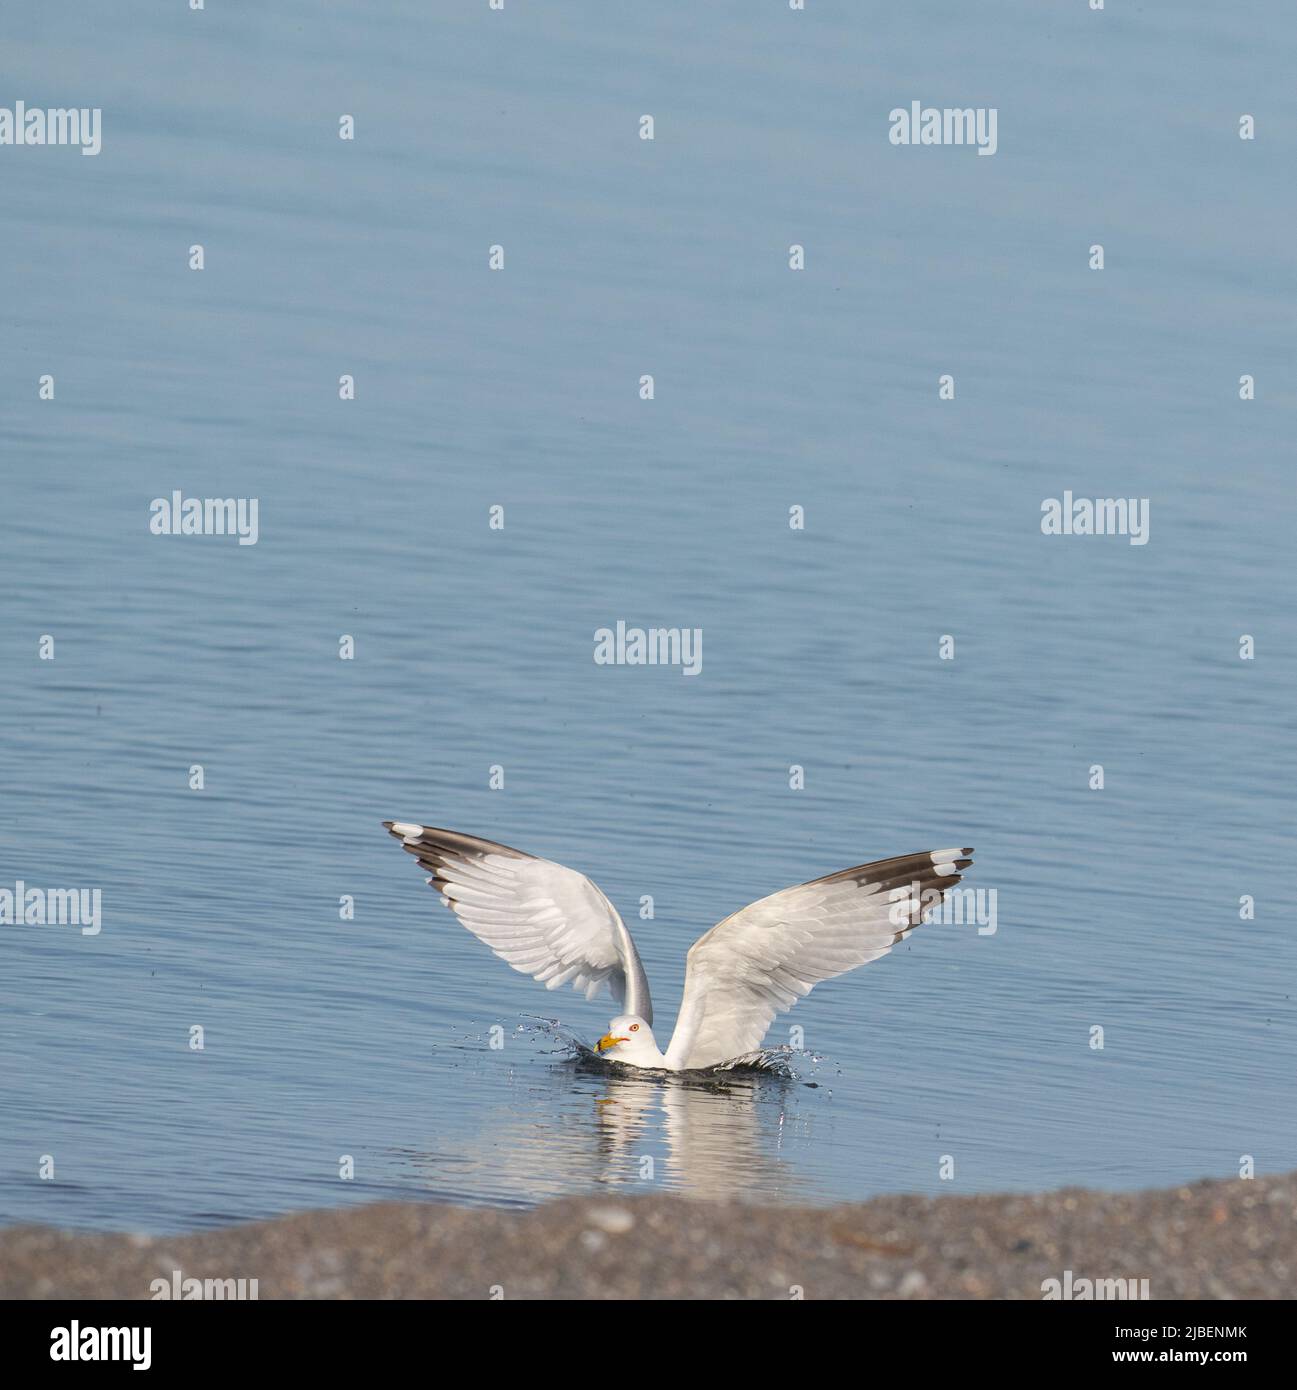 One isolated sea gull water bird or water fowl floating in calm water with wings spread wide open white wings with black tips room for type content Stock Photo